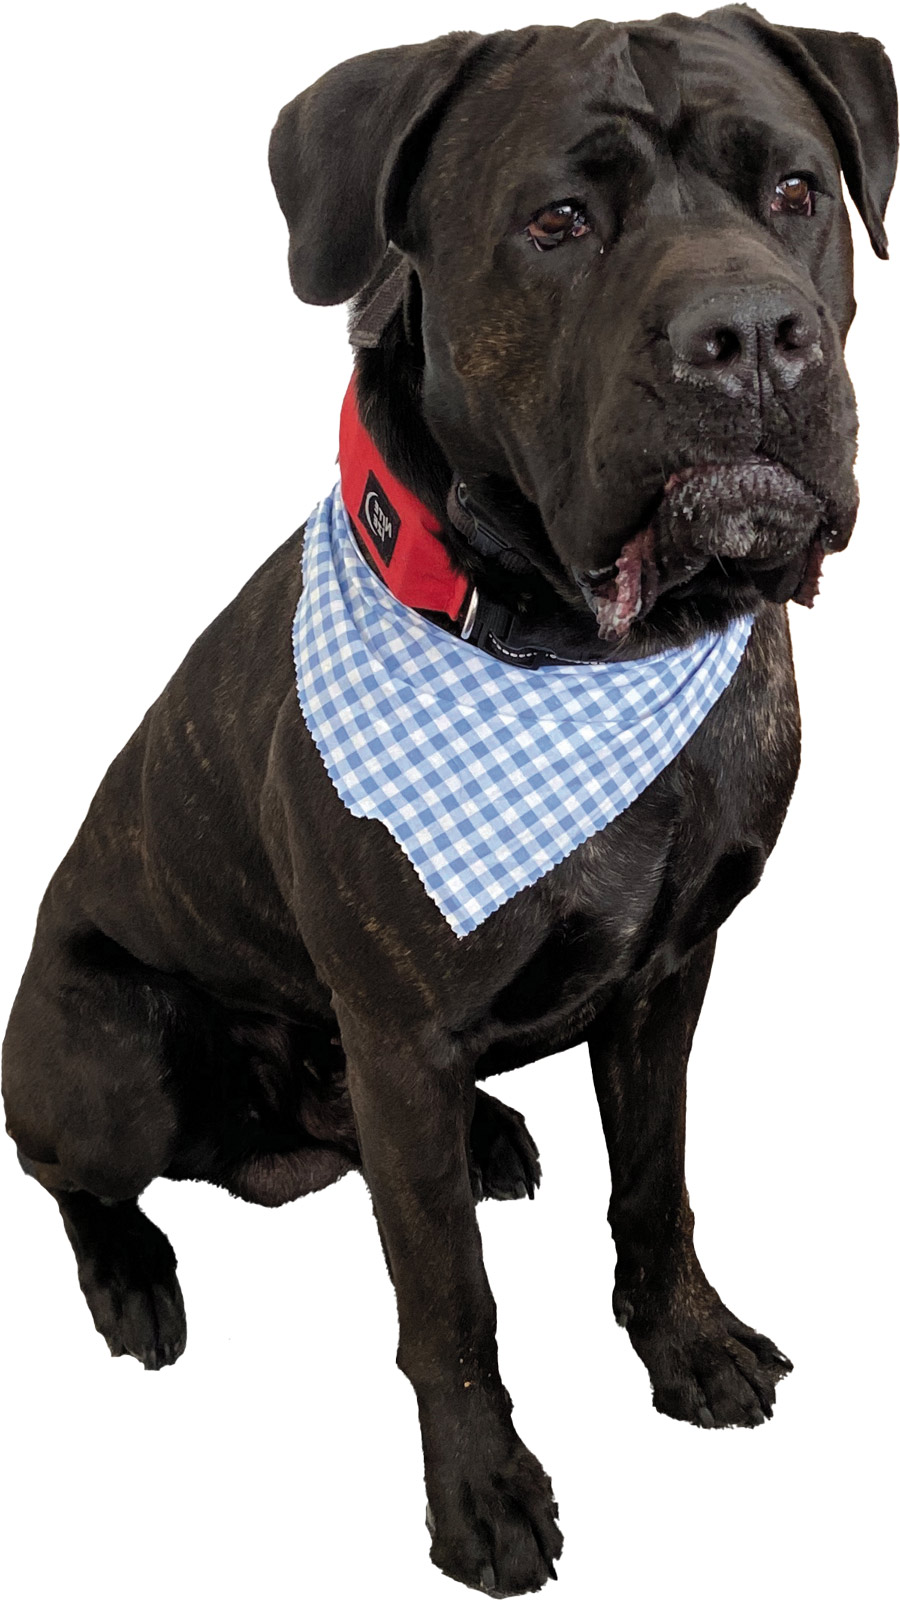 Dog wearing a hanker-chief and collar